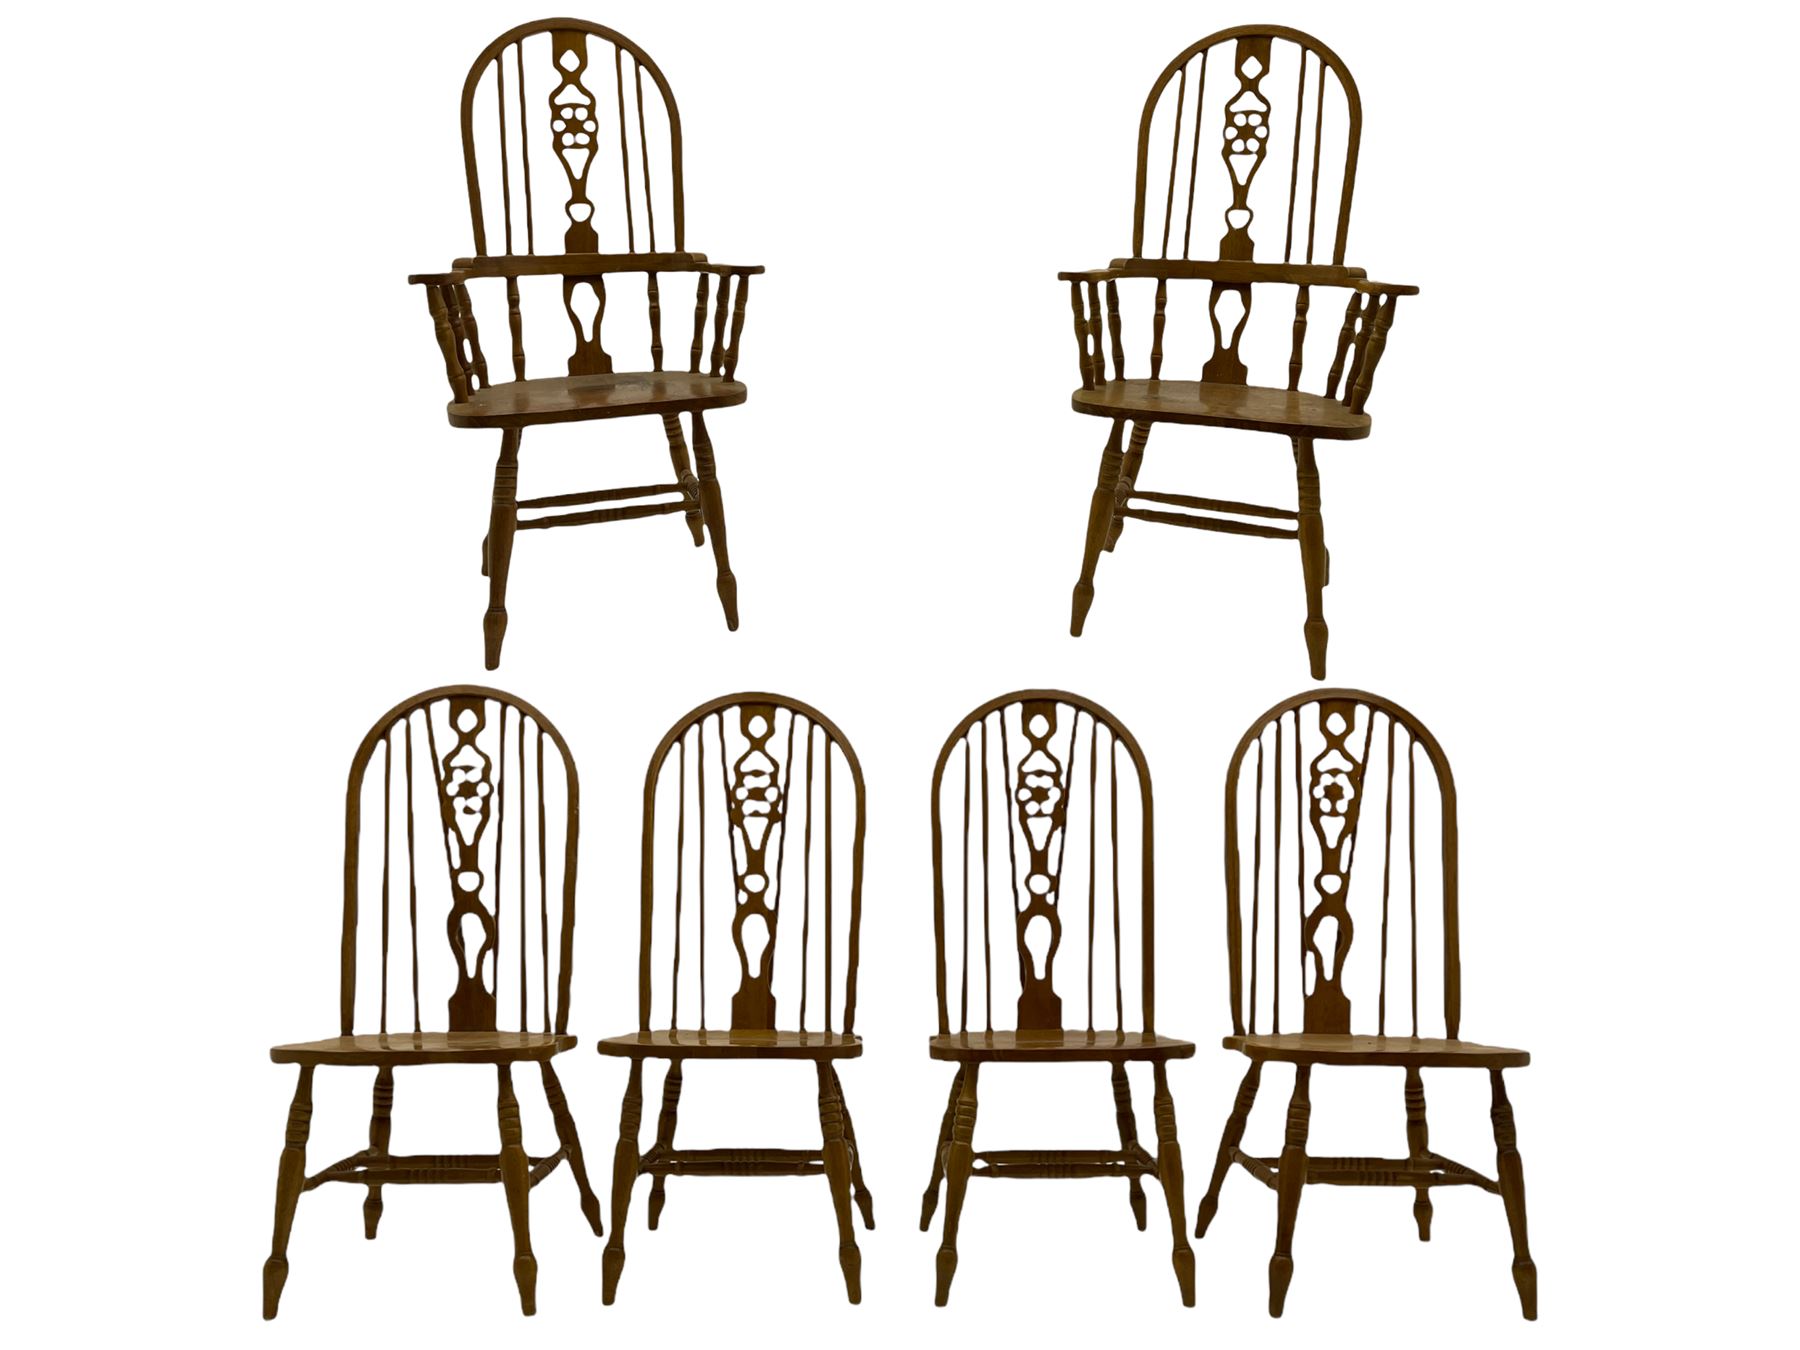 Set of six lightwood Windsor style dining chairs